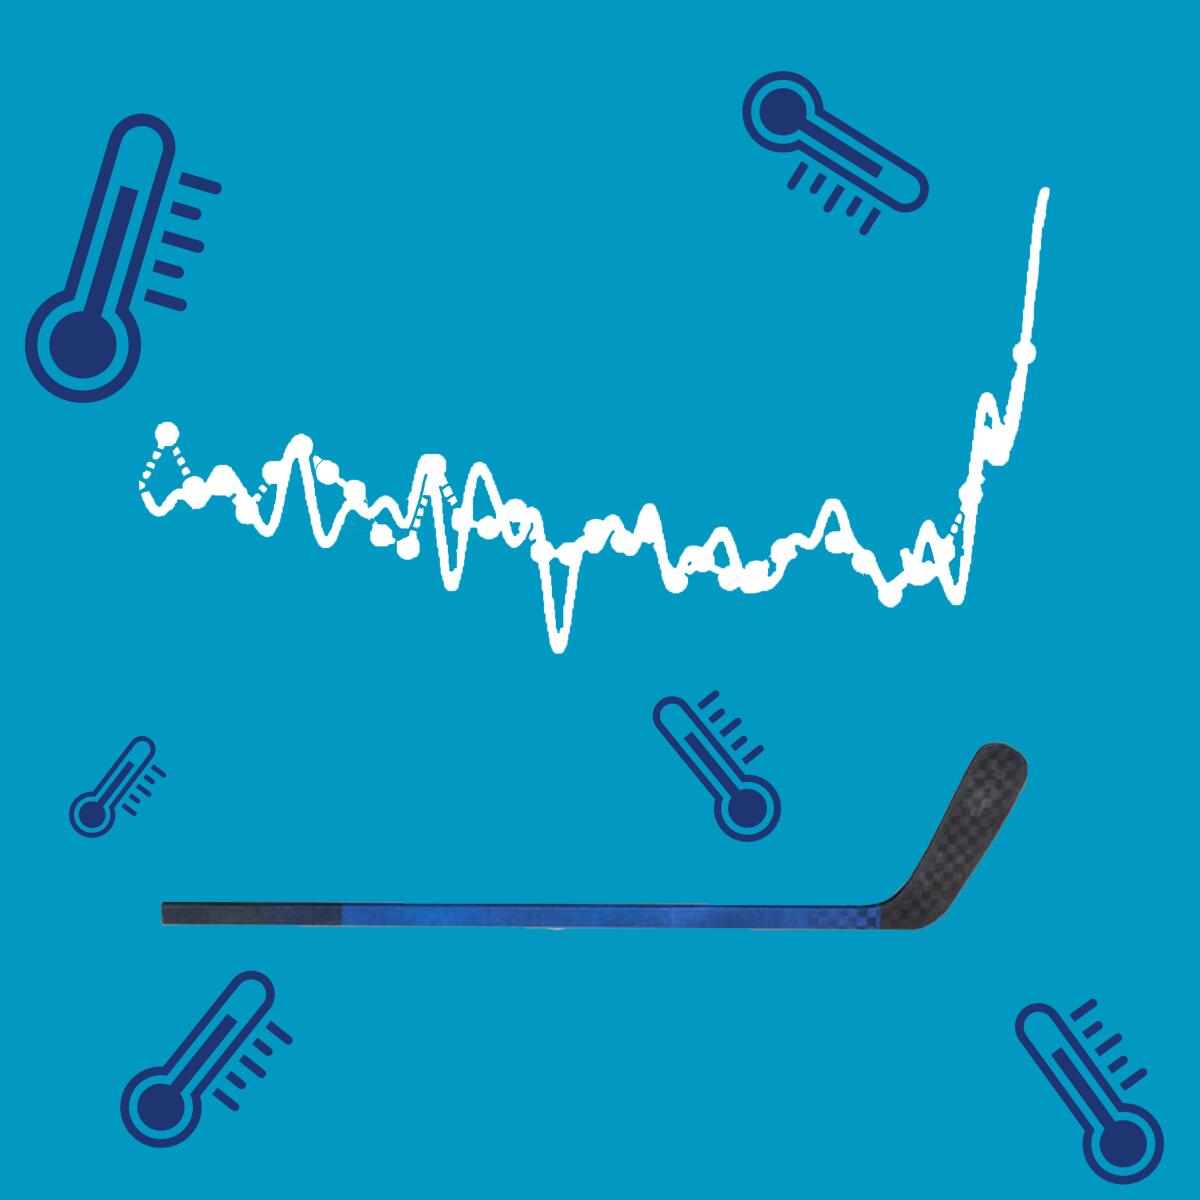 An illustration of thermometers and a hockey stick